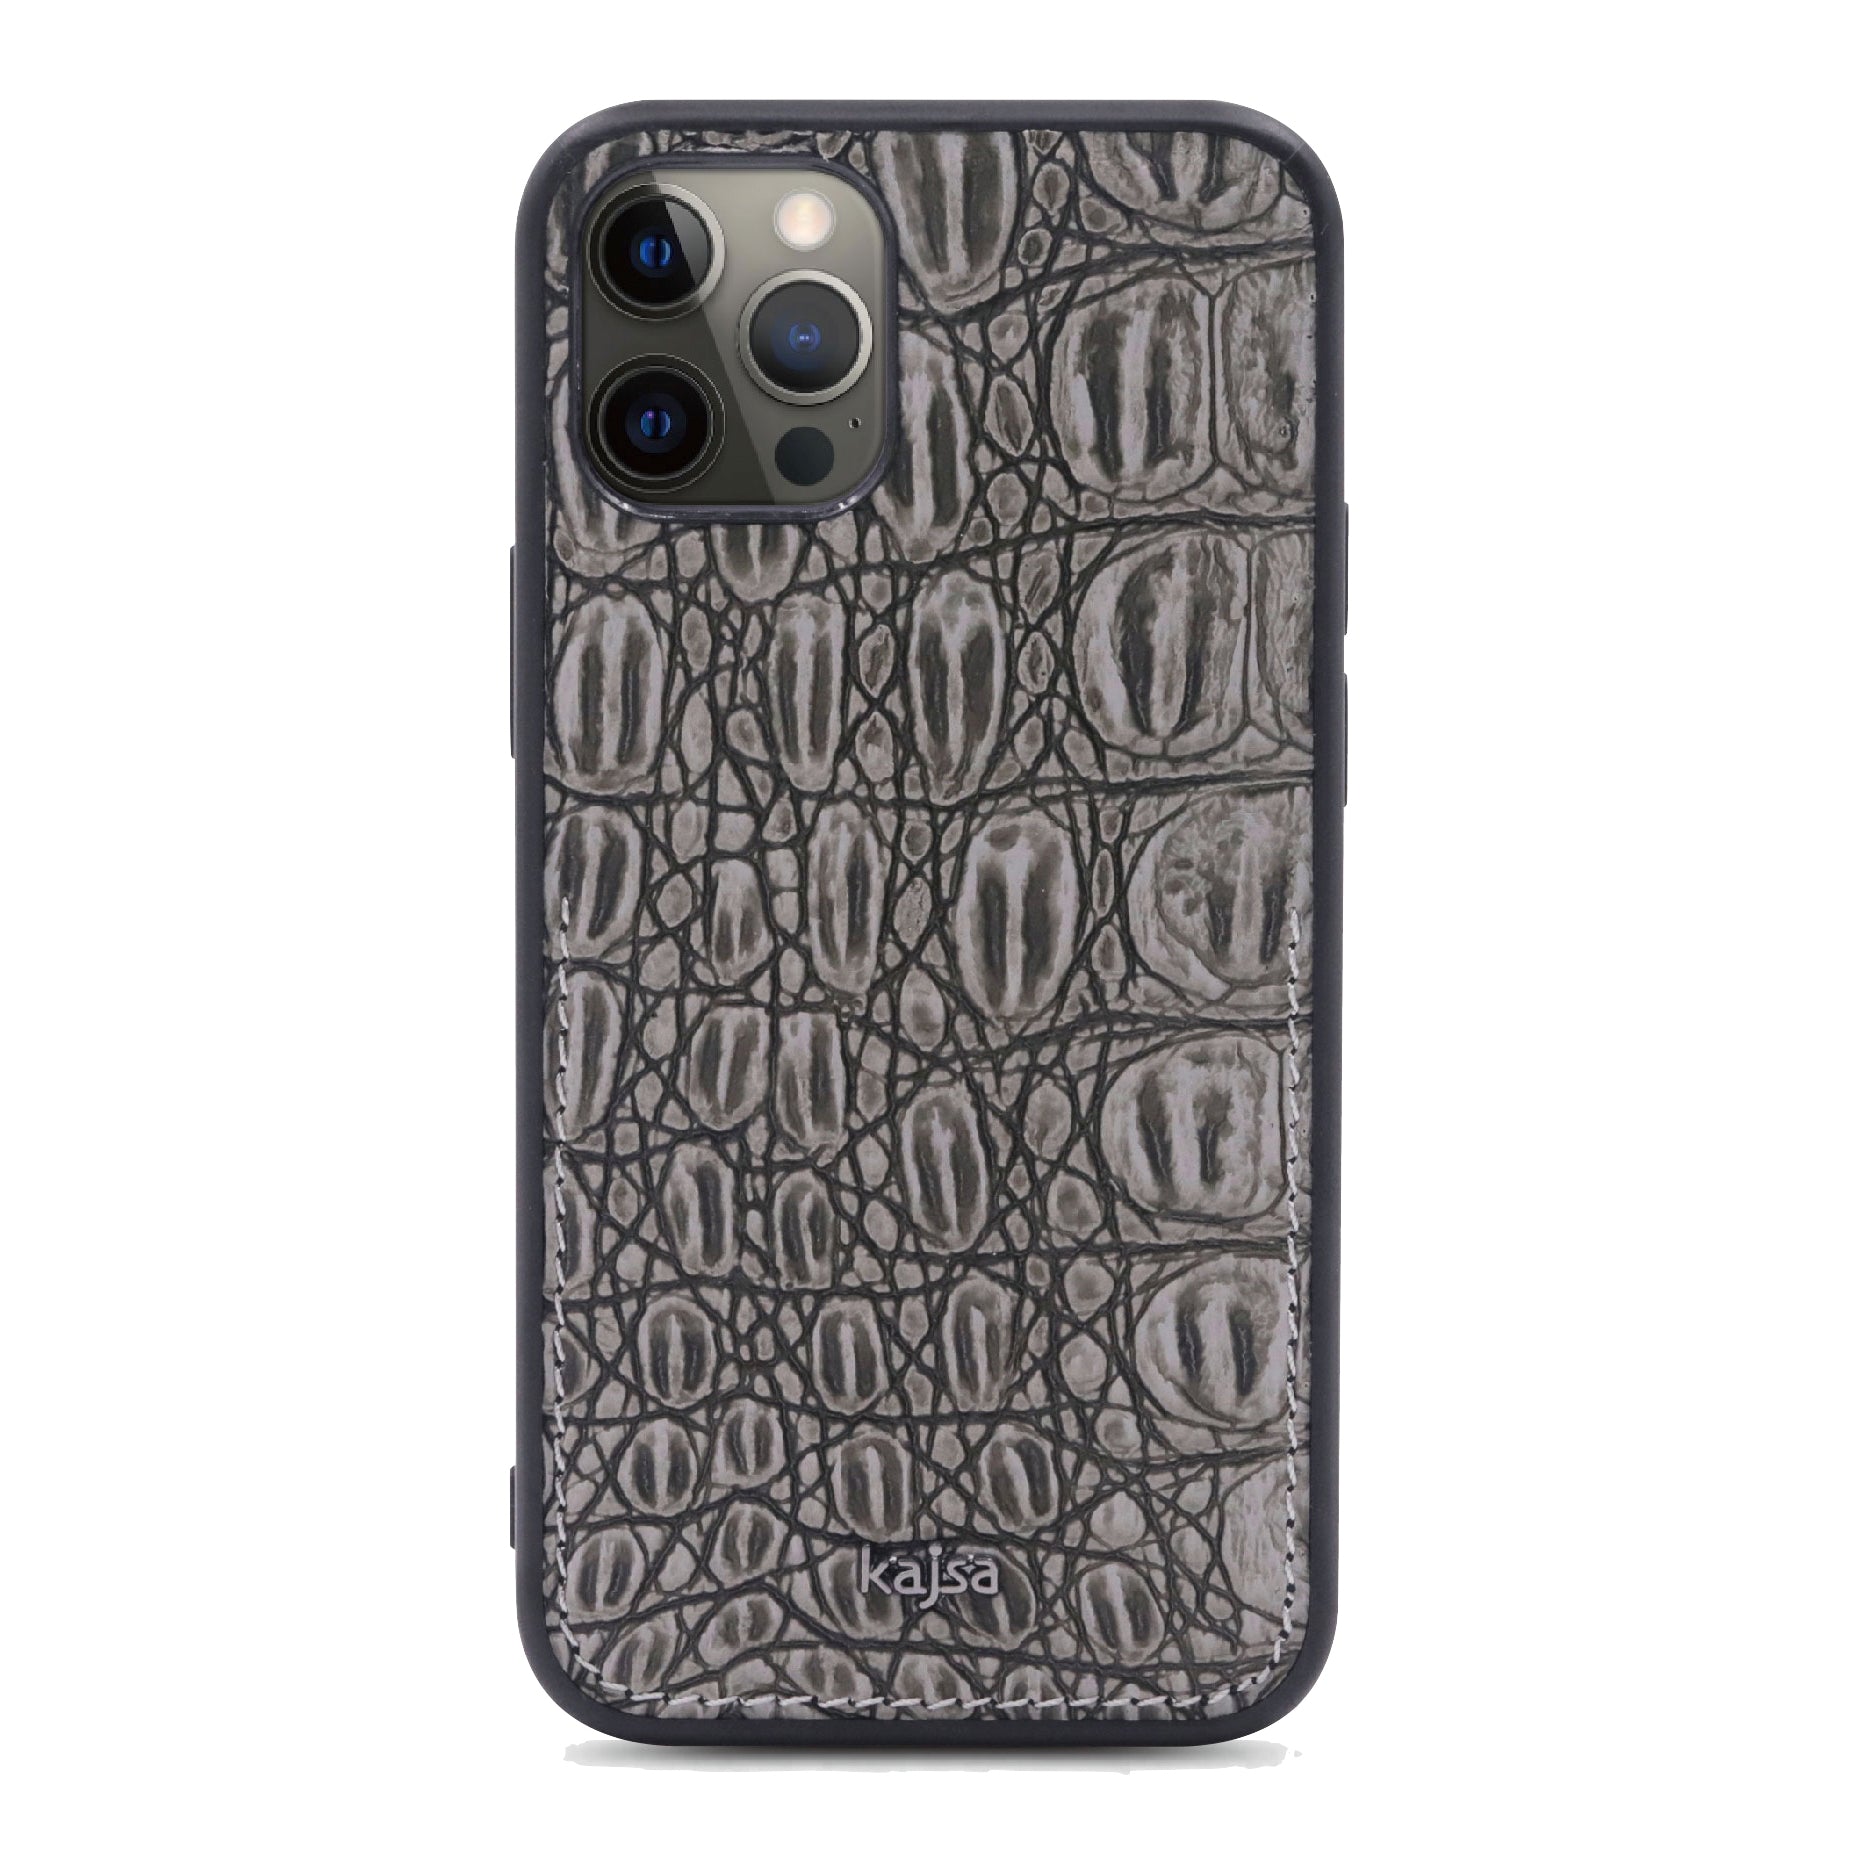 Glamorous Collection - Dirty Croco Back Case for iPhone 12-Phone Case- phone case - phone cases- phone cover- iphone cover- iphone case- iphone cases- leather case- leather cases- DIYCASE - custom case - leather cover - hand strap case - croco pattern case - snake pattern case - carbon fiber phone case - phone case brand - unique phone case - high quality - phone case brand - protective case - buy phone case hong kong - online buy phone case - iphone‎手機殼 - 客製化手機殼 - samsung ‎手機殼 - 香港手機殼 - 買電話殼